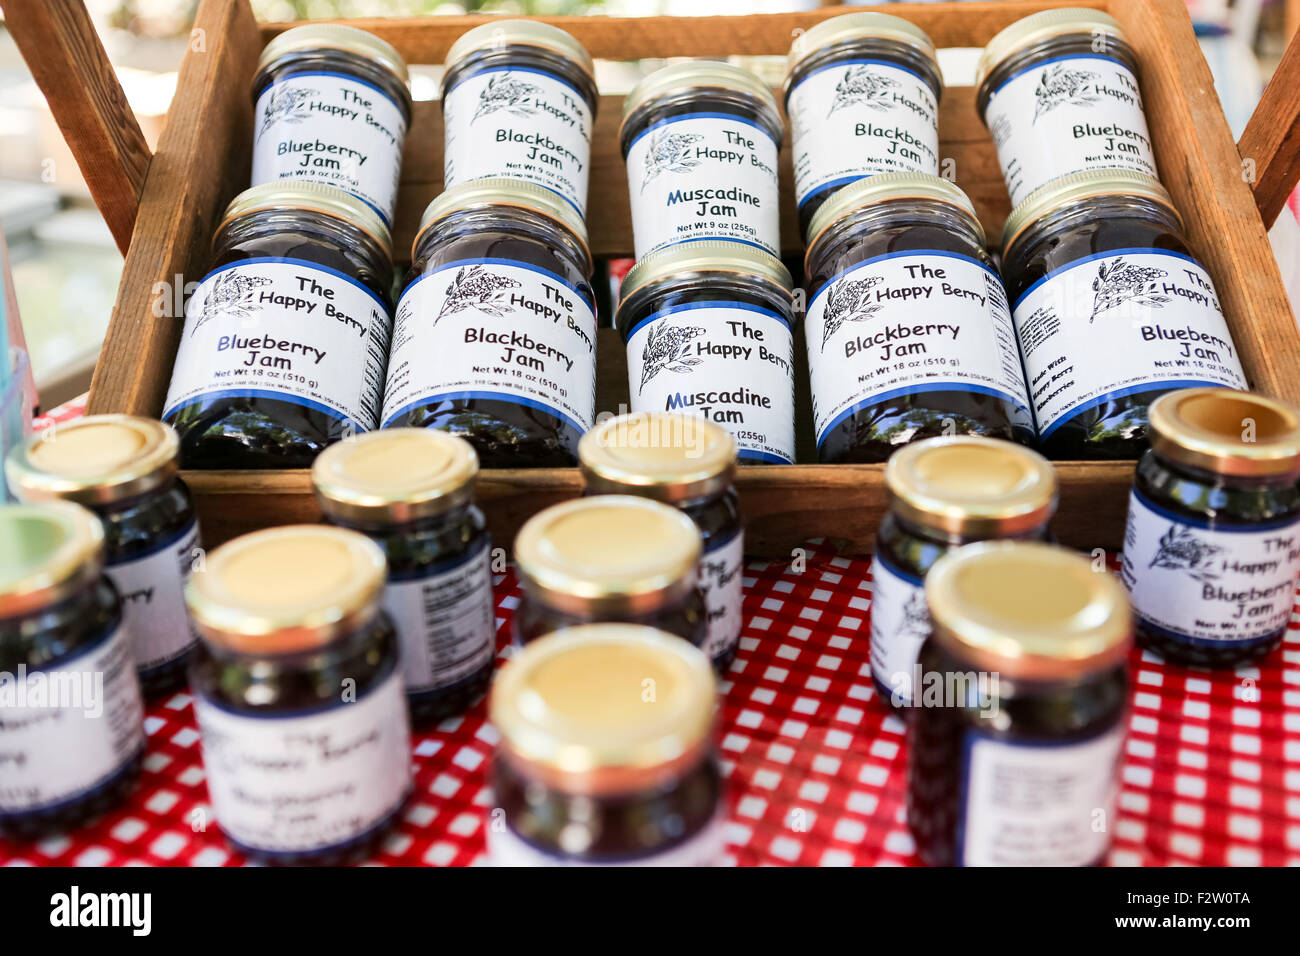 Locally grown and made jams on display at the Farmers Market along Main Street in downtown Greenville, South Carolina. Stock Photo